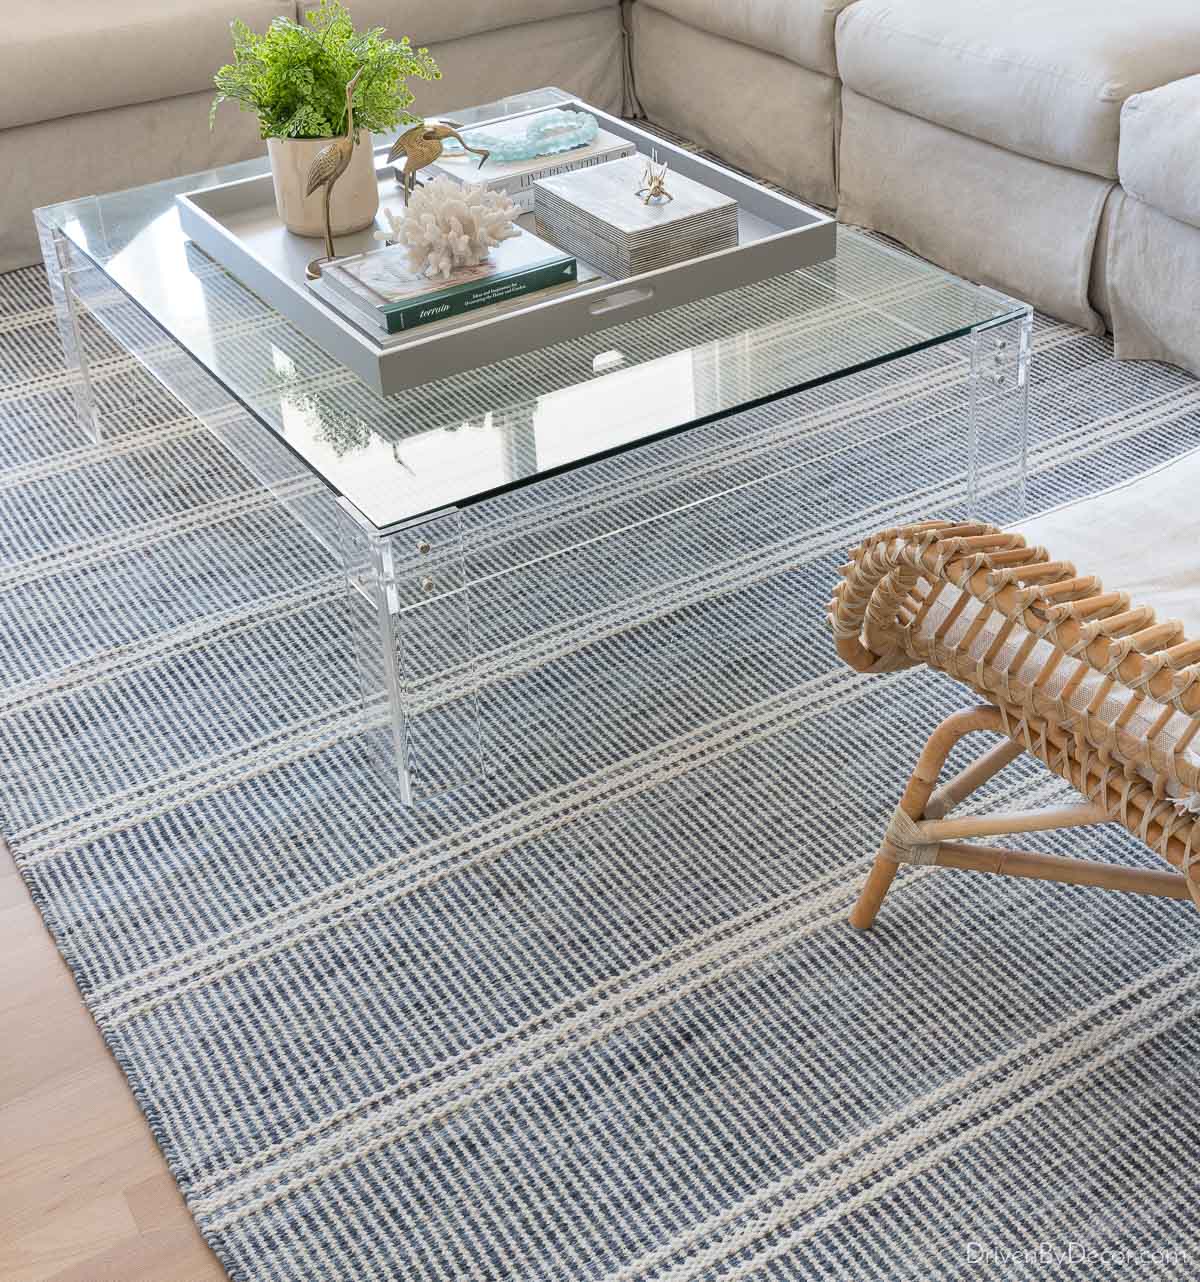 Love this blue striped rug for our living room!